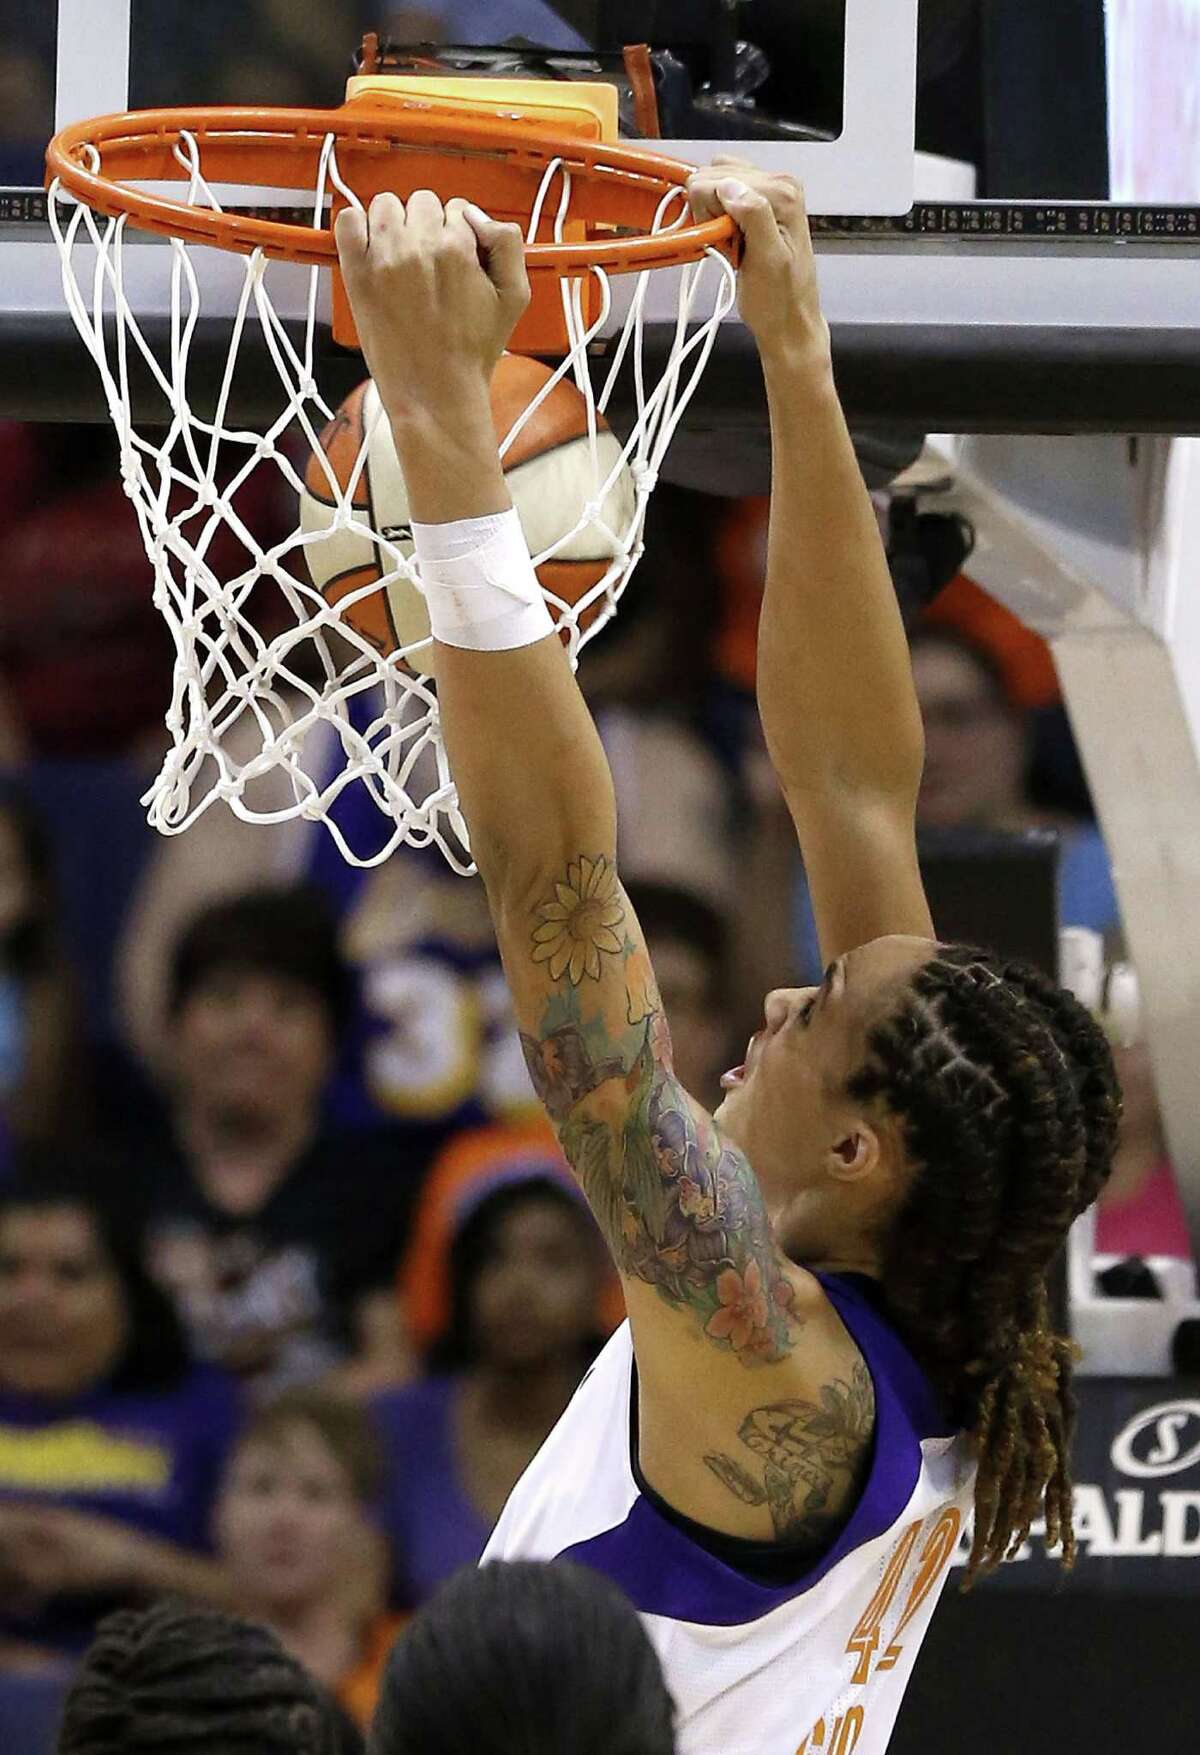 Wnba Griner Dunks Twice In Debut But Loses In Rout